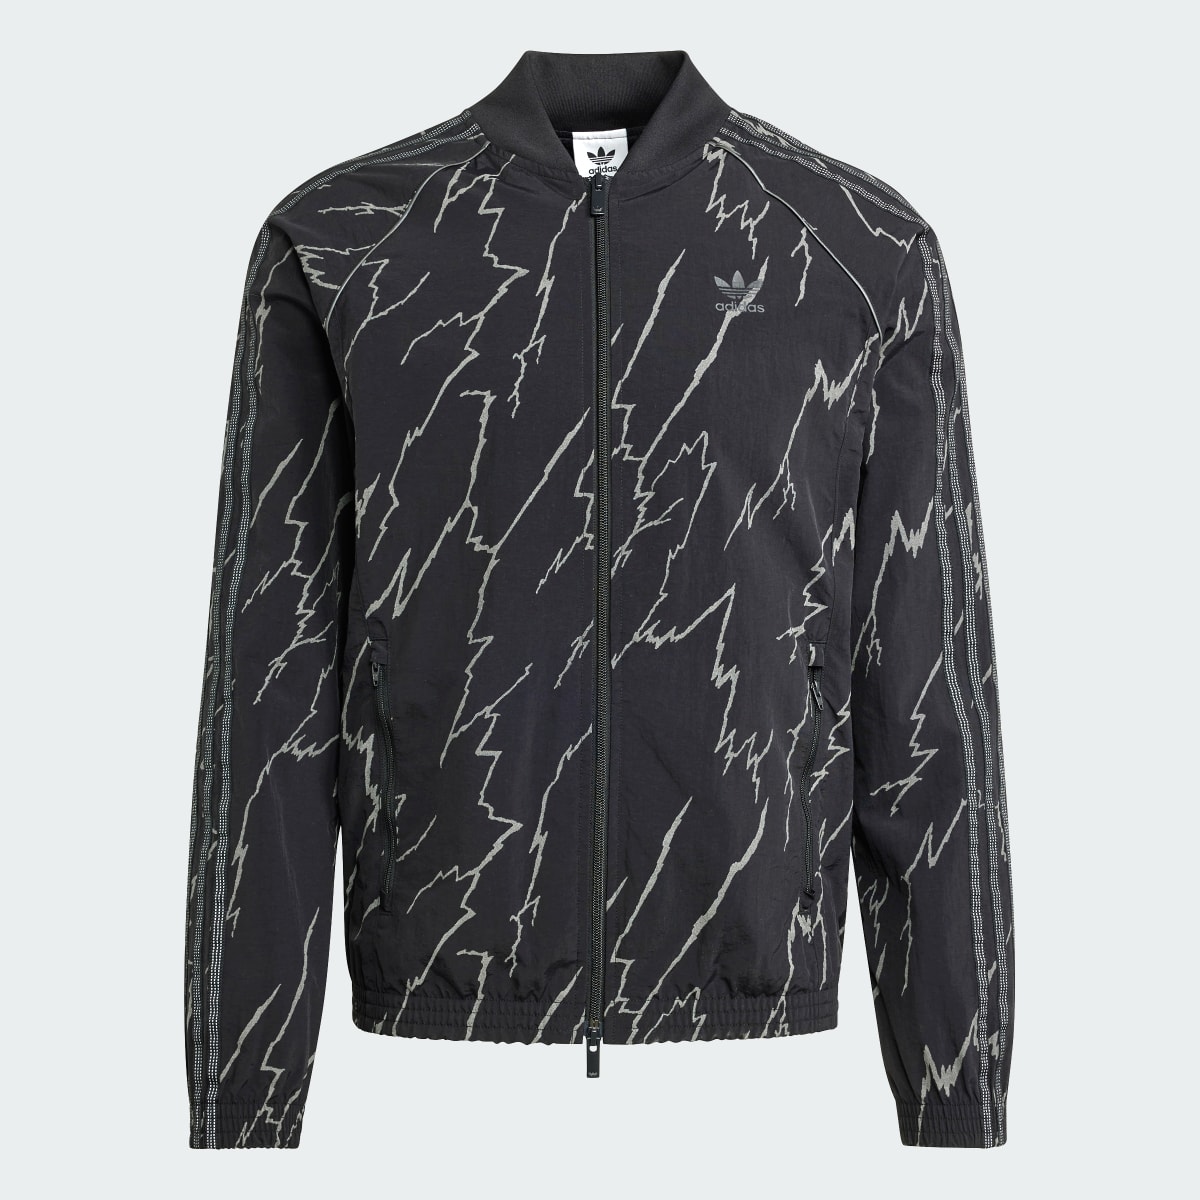 Adidas Allover Print SST Track Top. 5